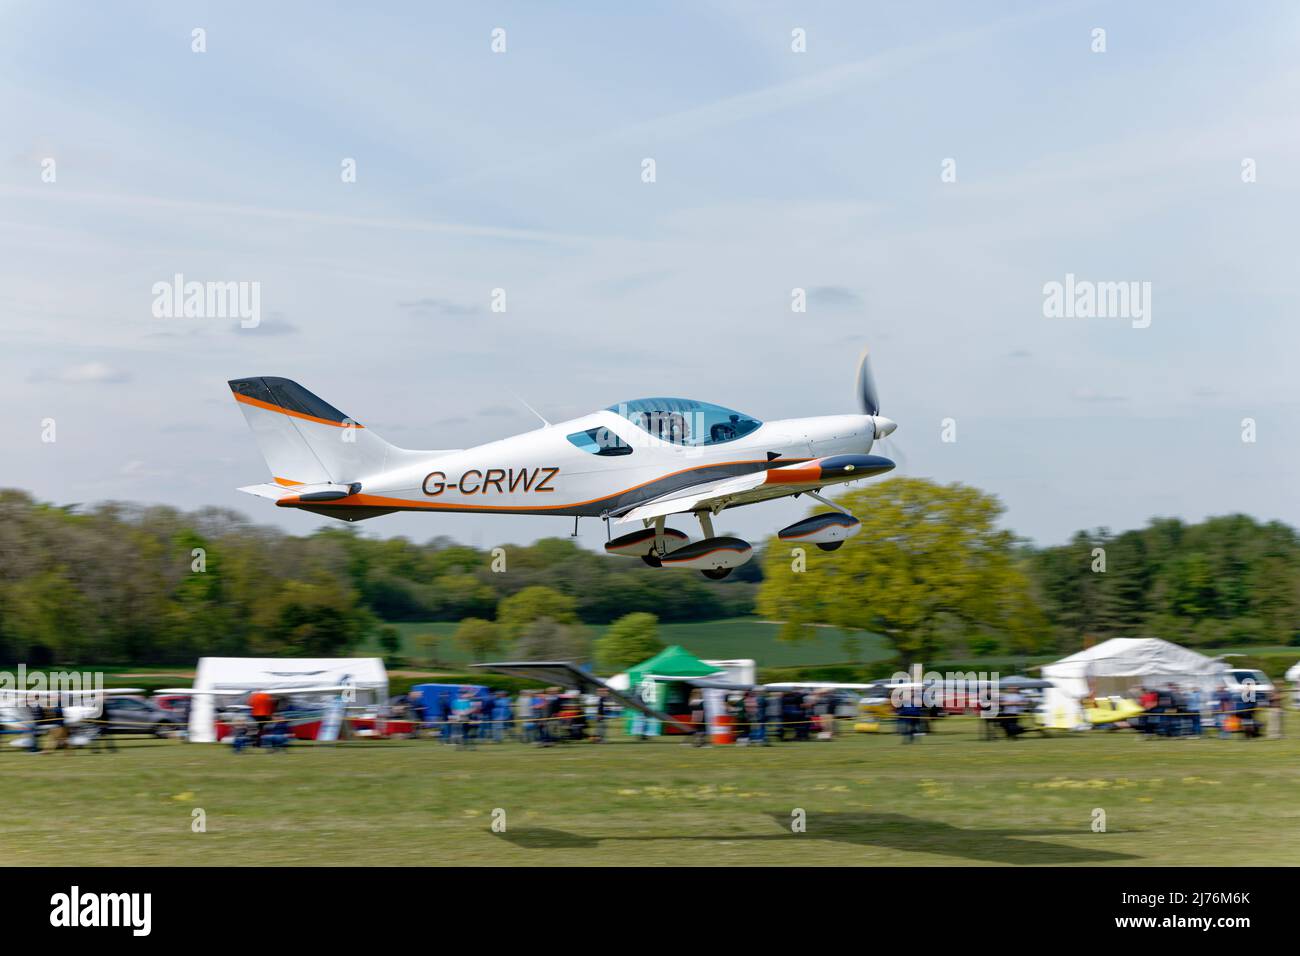 Smart white CZAW Sportscruiser airplane G-CRWZ departs Popham airfield near Basingstoke in Hampshire after attending the annual microlight fly in Stock Photo